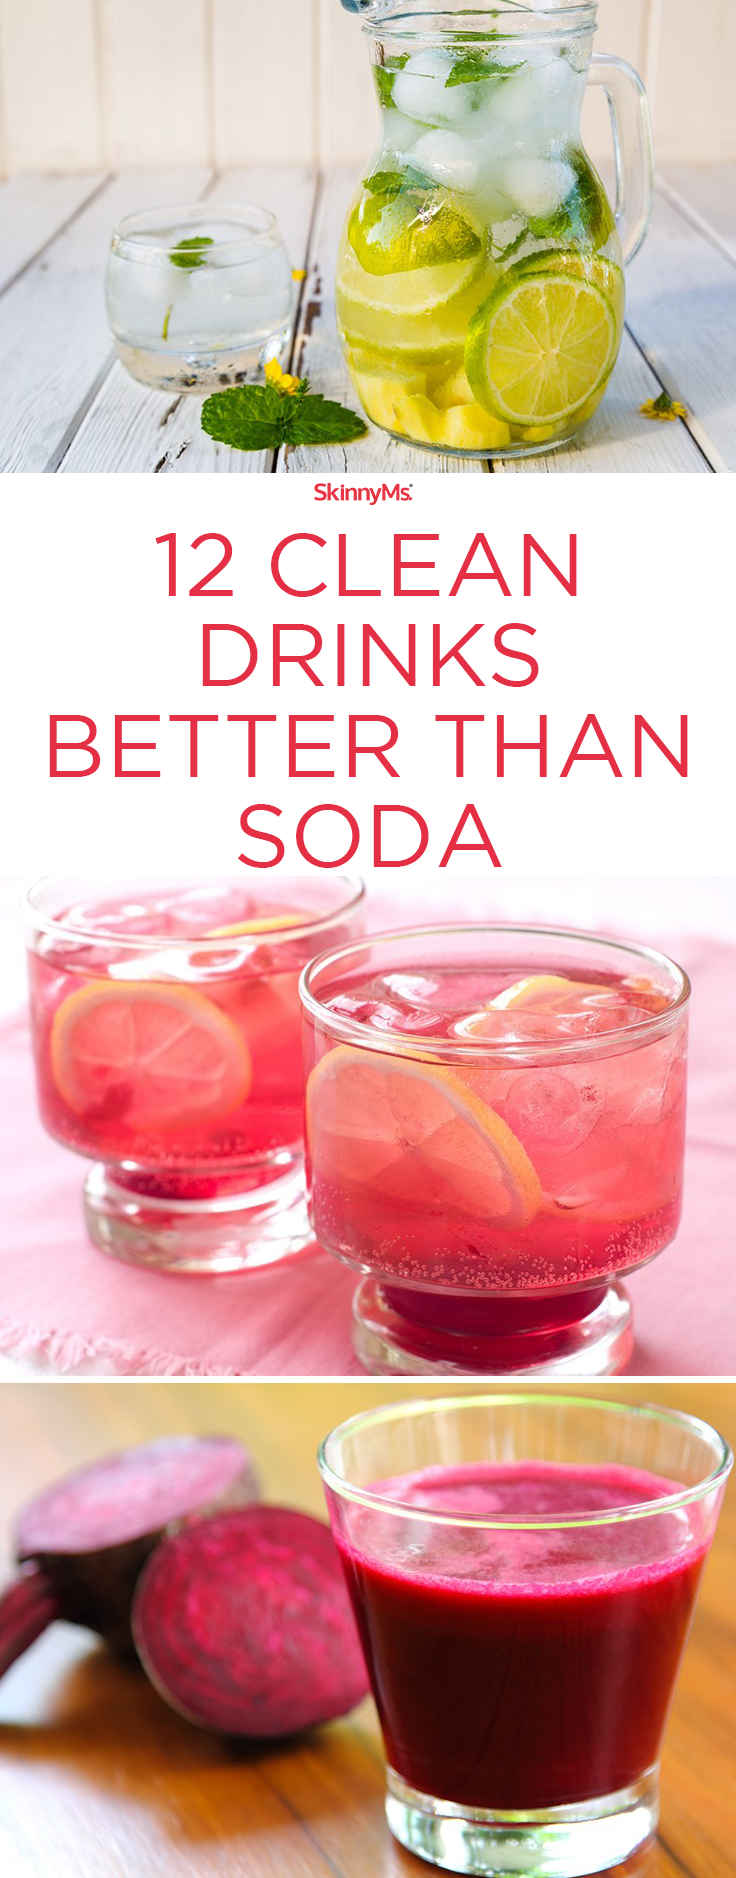 12 Clean Drinks Better than Soda